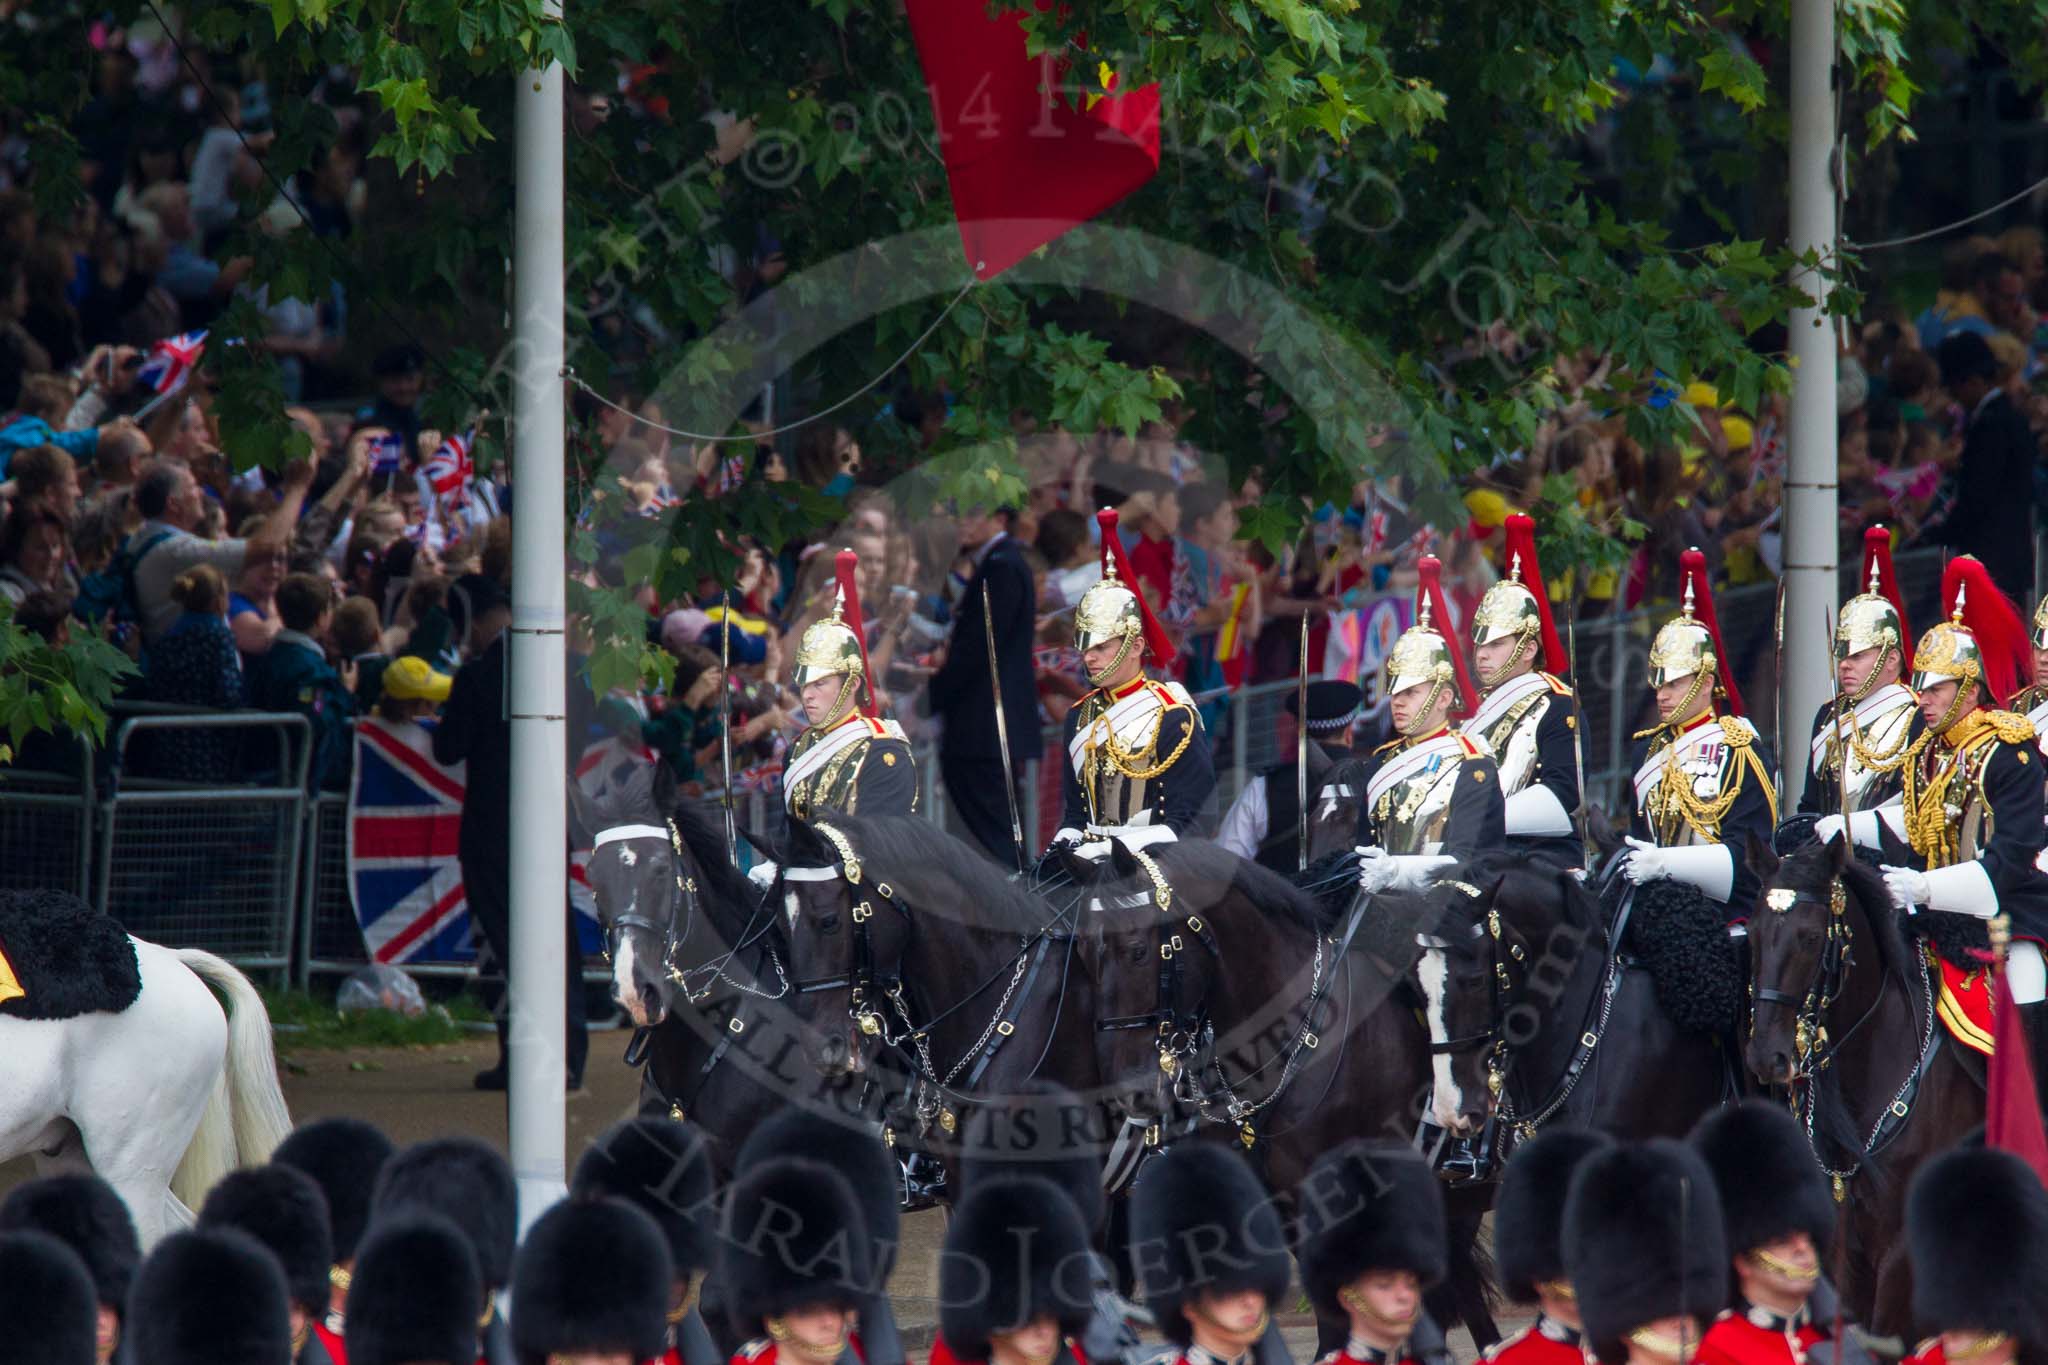 Trooping the Colour 2014.
Horse Guards Parade, Westminster,
London SW1A,

United Kingdom,
on 14 June 2014 at 10:56, image #321